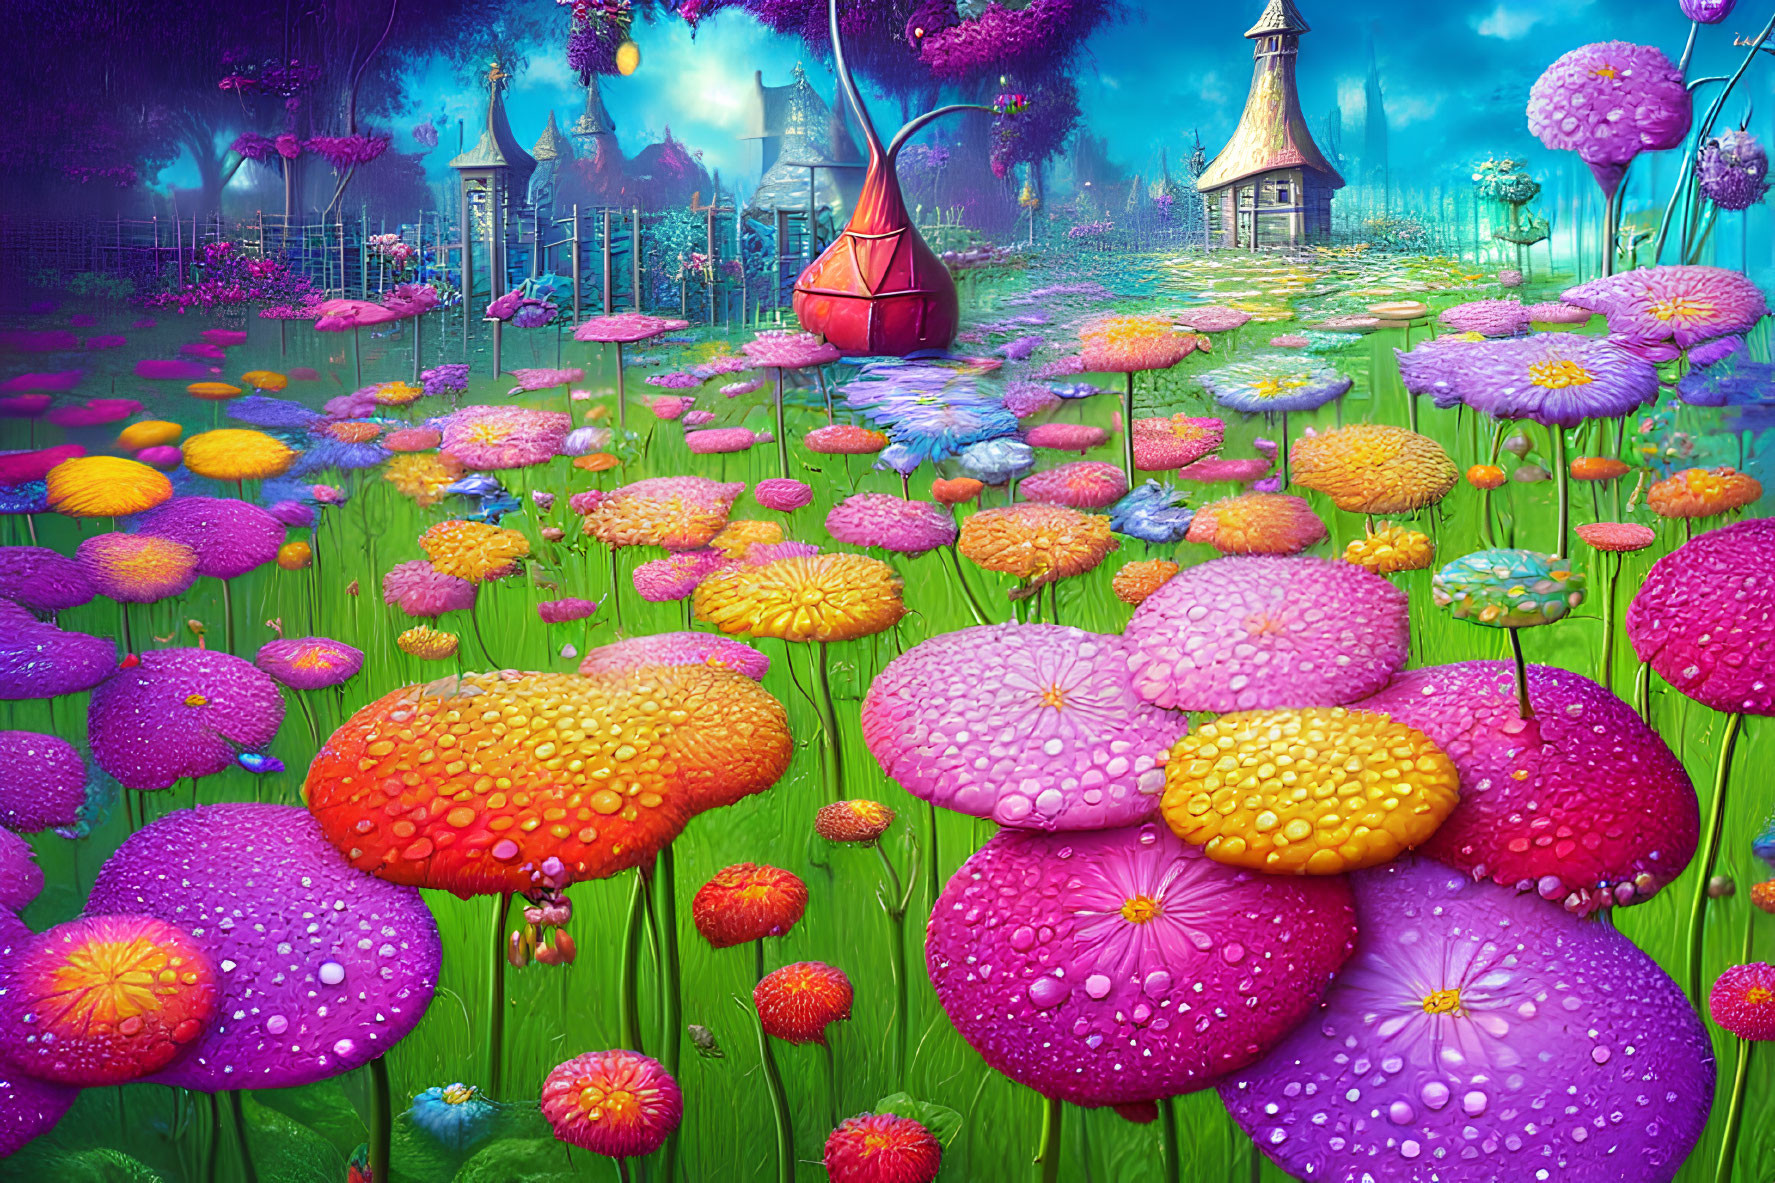 Fantasy landscape with oversized flowers, whimsical structures, and purple sky